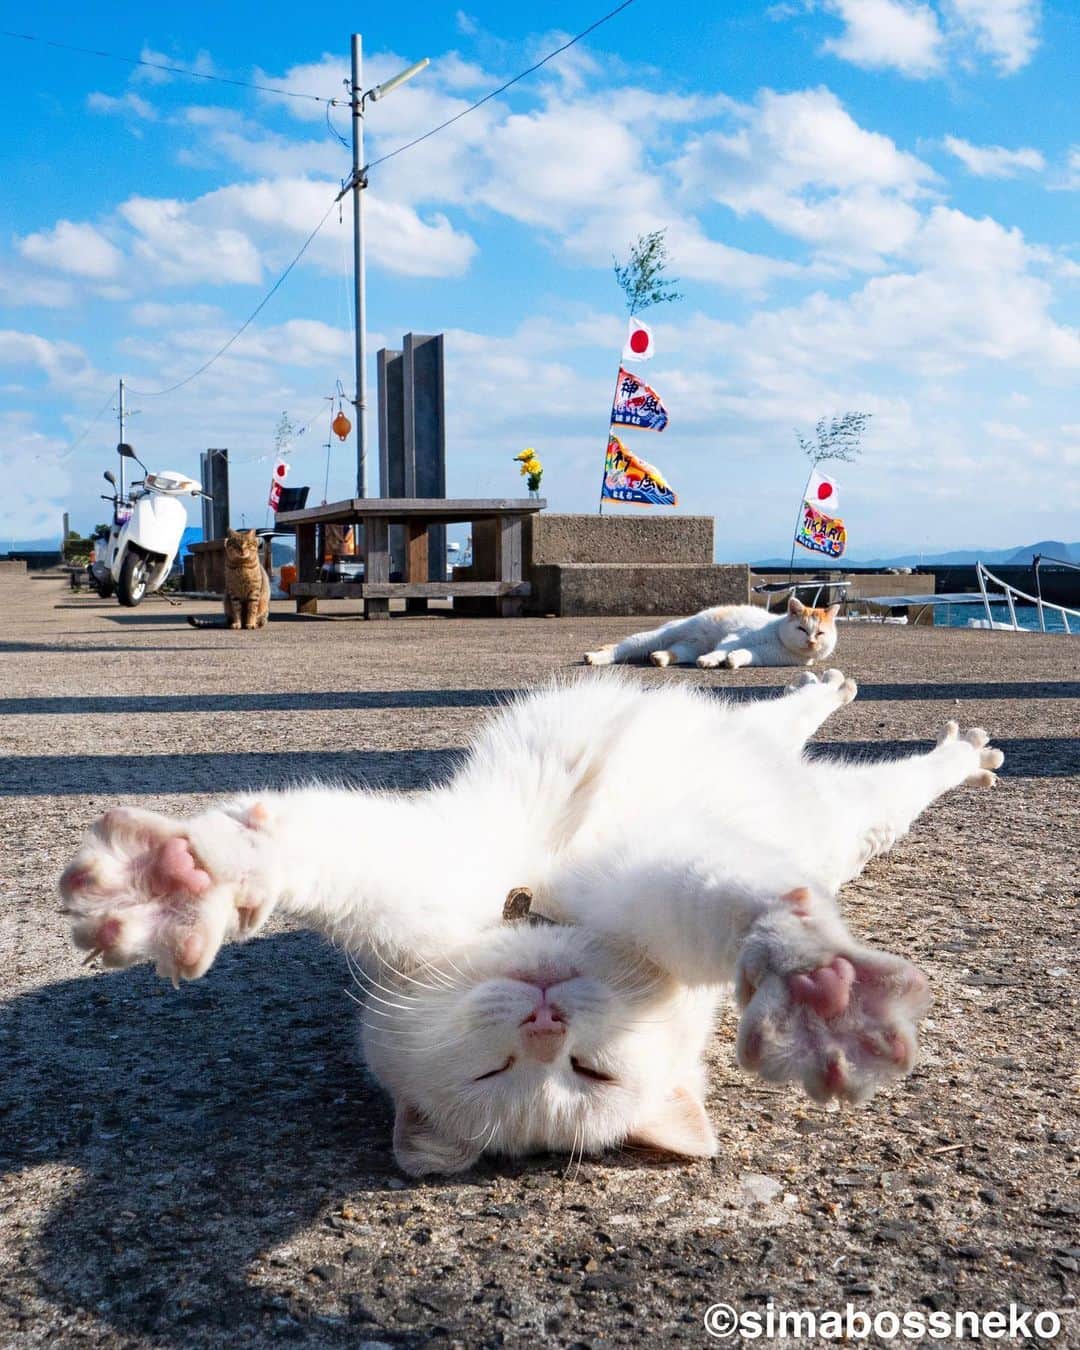 simabossnekoさんのインスタグラム写真 - (simabossnekoInstagram)「・ 島猫セレクション✨ Island Cats selection! Swipeしてね←←←🐾  （写真は、島ねこ日めくりカレンダーPart1と2より抜粋。 All photos are excerpts from Island Cats Day-to-Day Calendar Part1&2🏝）  ＼人気につき再入荷／ 島ねこ日めくりカレンダーPart 1&2 の販売を再開しました！ minneとメルカリShopsにて販売。  ★minne＆メルカリshops限定です★ 「島にゃんこサイン本」とのセット販売も❗️ この機会に是非🐾  minne、メルカリShopsへのリンクは @simabossneko または @p_nyanco22 のプロフィールのURL（lit.link/simabossneko）からご覧いただけます。 ・ ・ ●Restocked due to popularity Island cats day-to-day calendar Part 1 & 2 are now on sale!  ★minne simabossneko's shop only★ Set sales of New "Island cats(Shima Nyanko) an autographed photobook" are also available❗️ Please take this opportunity 🐾  Shop Links to minne “simabossneko's shop“ You can view it from the profile URL (lit.link/simabossneko) of @simabossneko or @p_nyanco22  ・ ・ #日めくりカレンダー #しまねこ #島猫 #ねこ #にゃんすたぐらむ #猫写真 #cats_of_world #catloversclub #pleasantcats #catstagram #meowed #ig_japan #lumixg9」2月26日 9時00分 - simabossneko